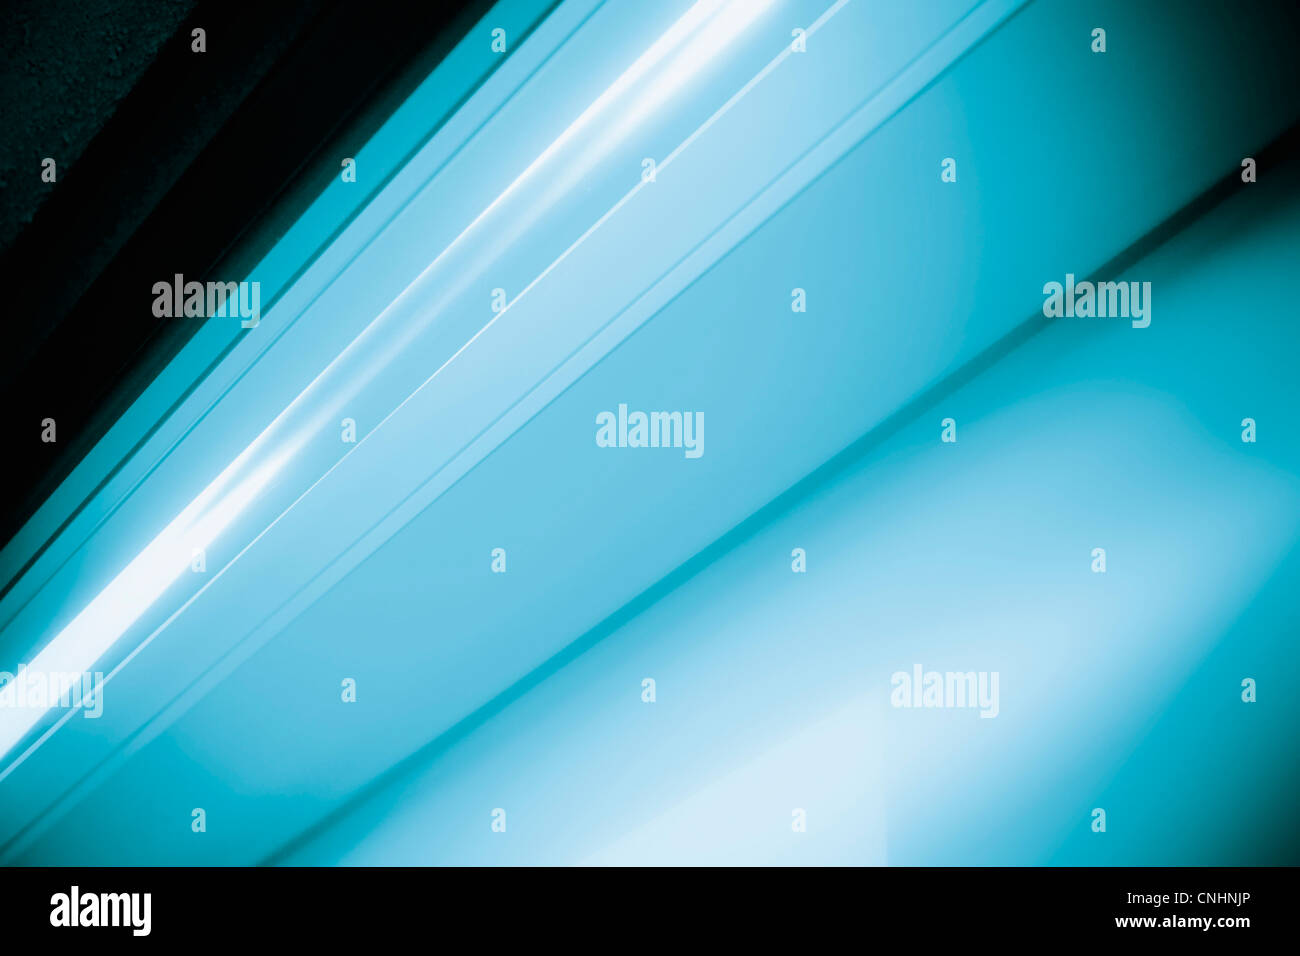 Close-up abstract of slanted blue shape Stock Photo